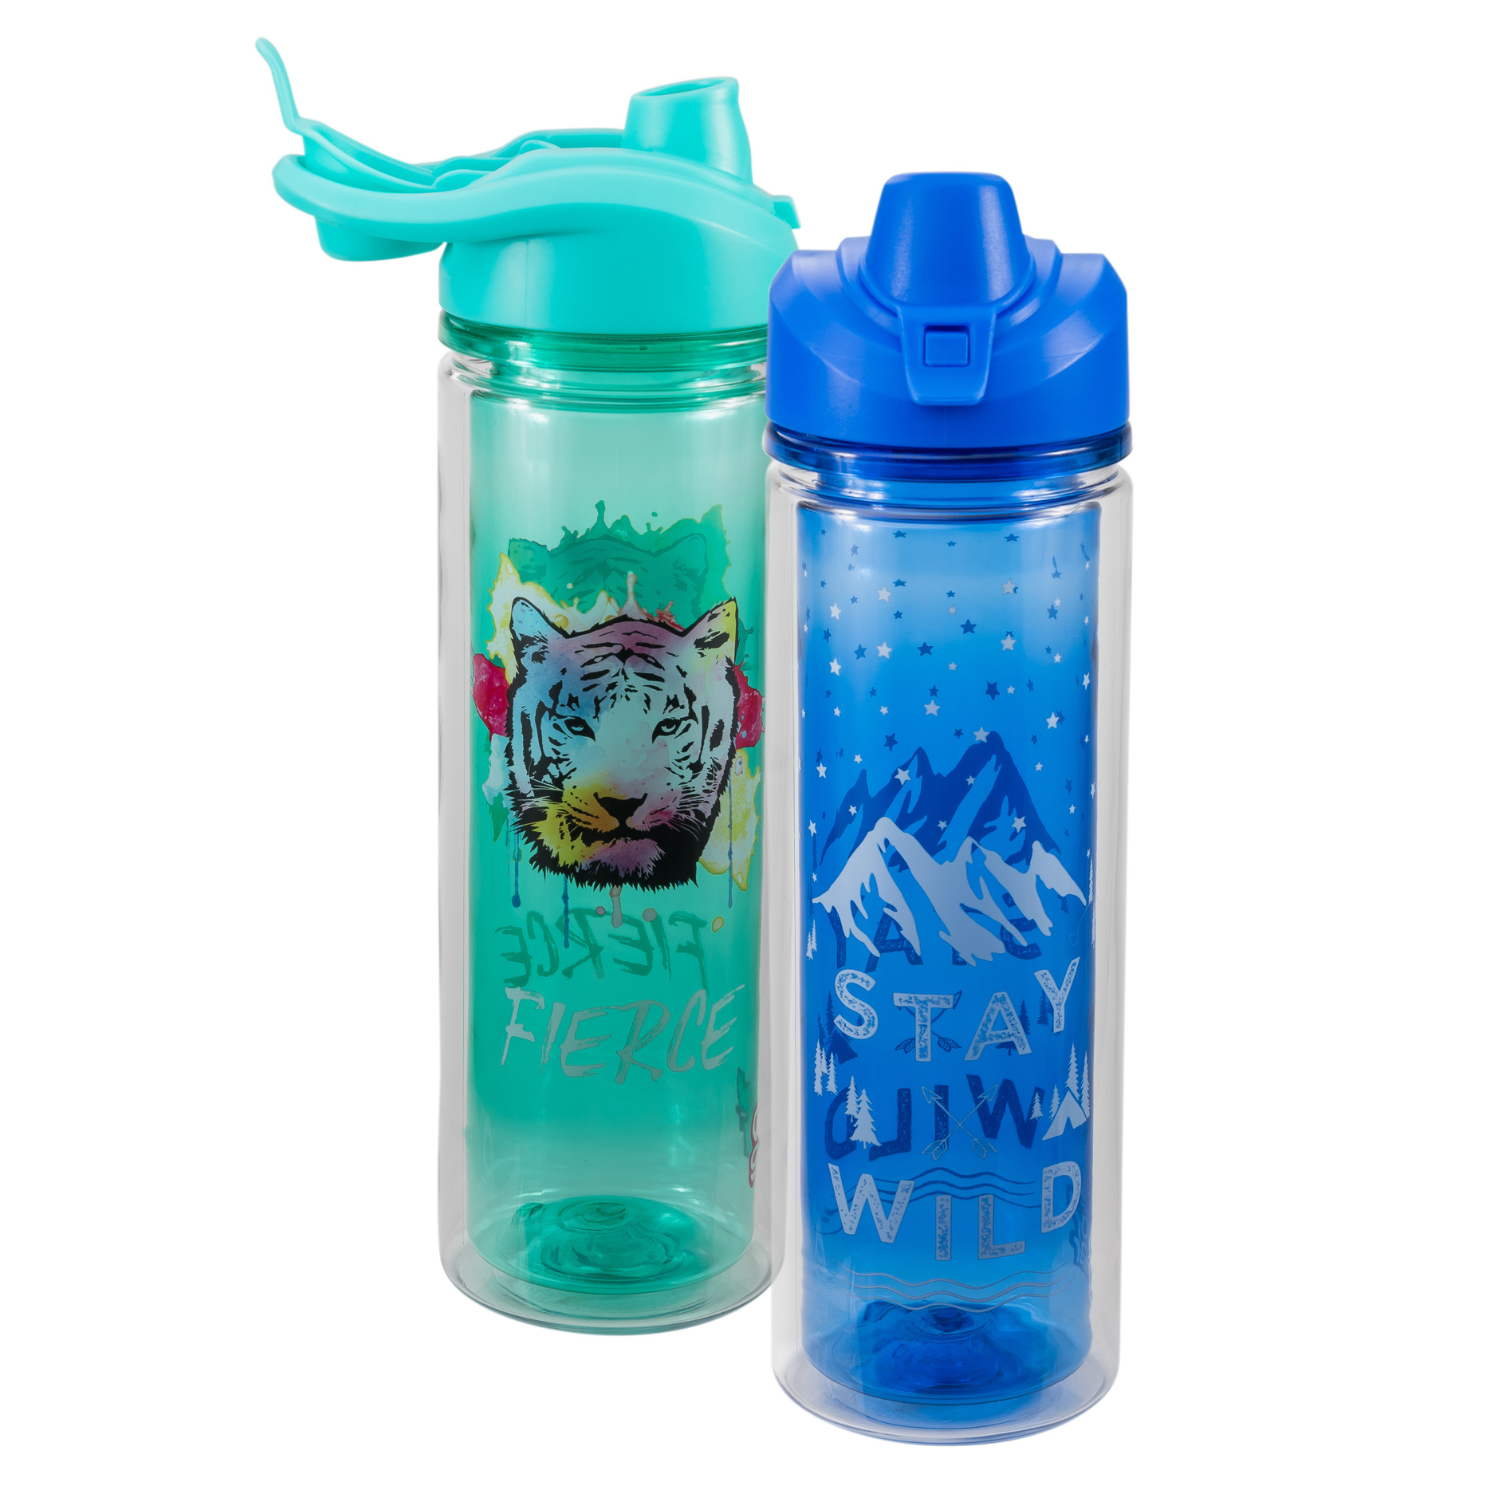 COOL GEAR 2-Pack 20 oz Essence Chugger Water Bottle with Wide Mouth & Flip Cap Design - Unicorn/Leaves - image 1 of 6